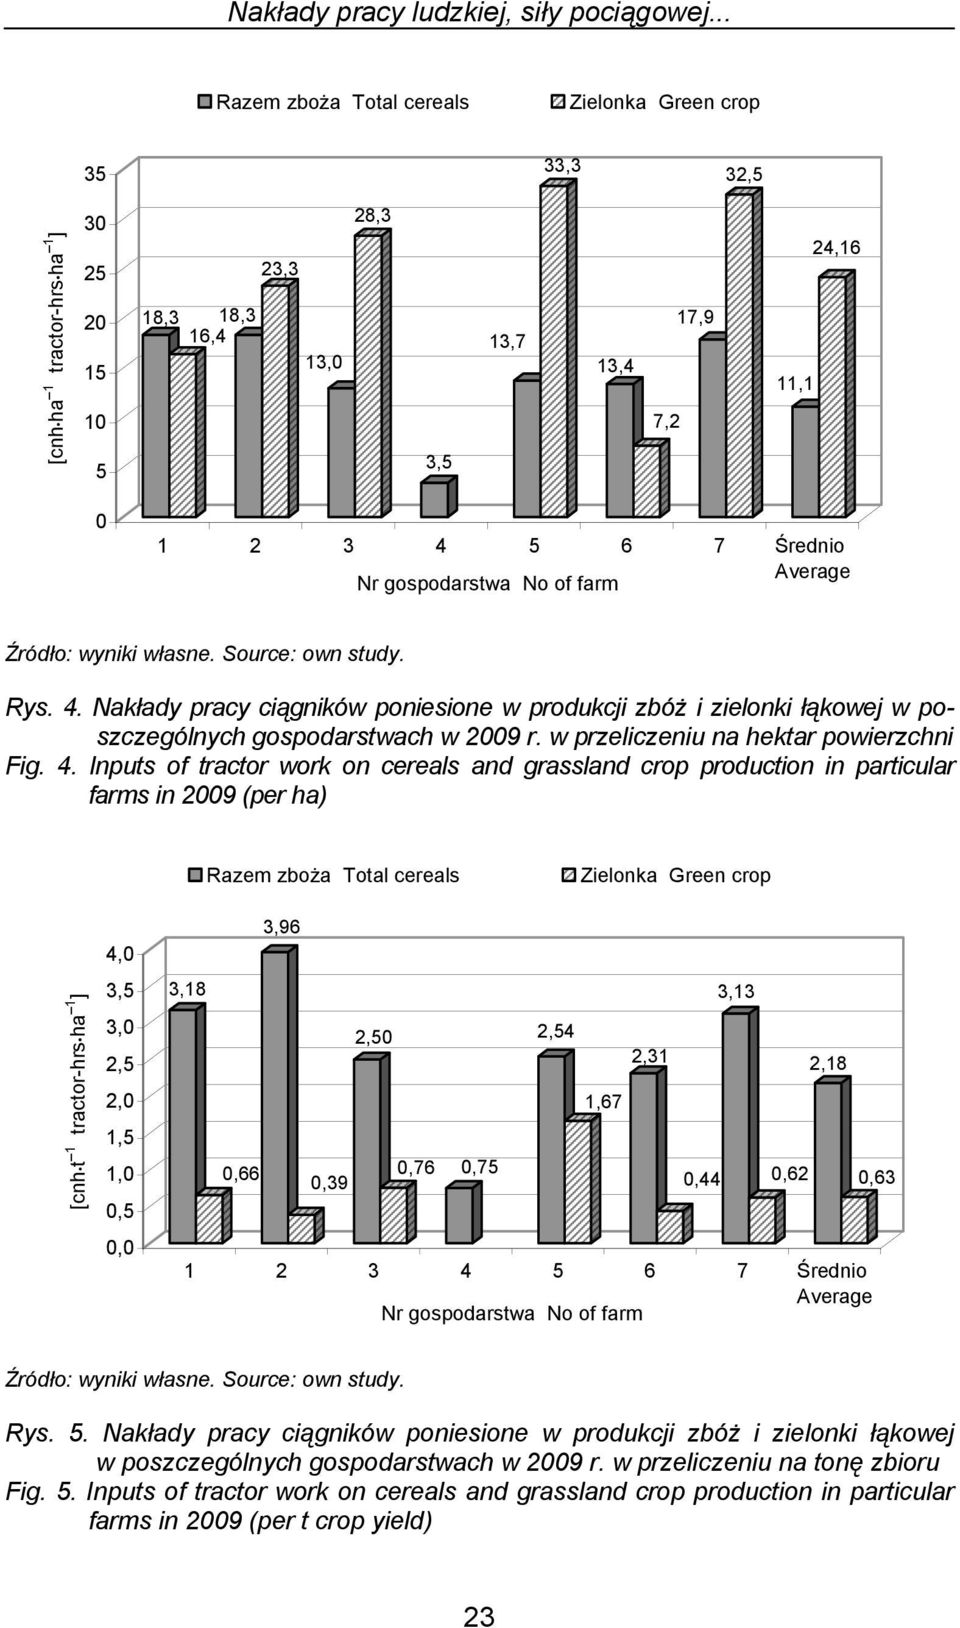 Inputs of tractor work on cereals and grassland crop production in particular farms in 2009 (per ha) [cnh t 1 tractor-hrs ha 1 ] 4,0 3,5 3,0 2,5 2,0 1,5 1,0 0,5 0,0 3,18 0,66 3,96 0,39 2,50 0,76 0,75